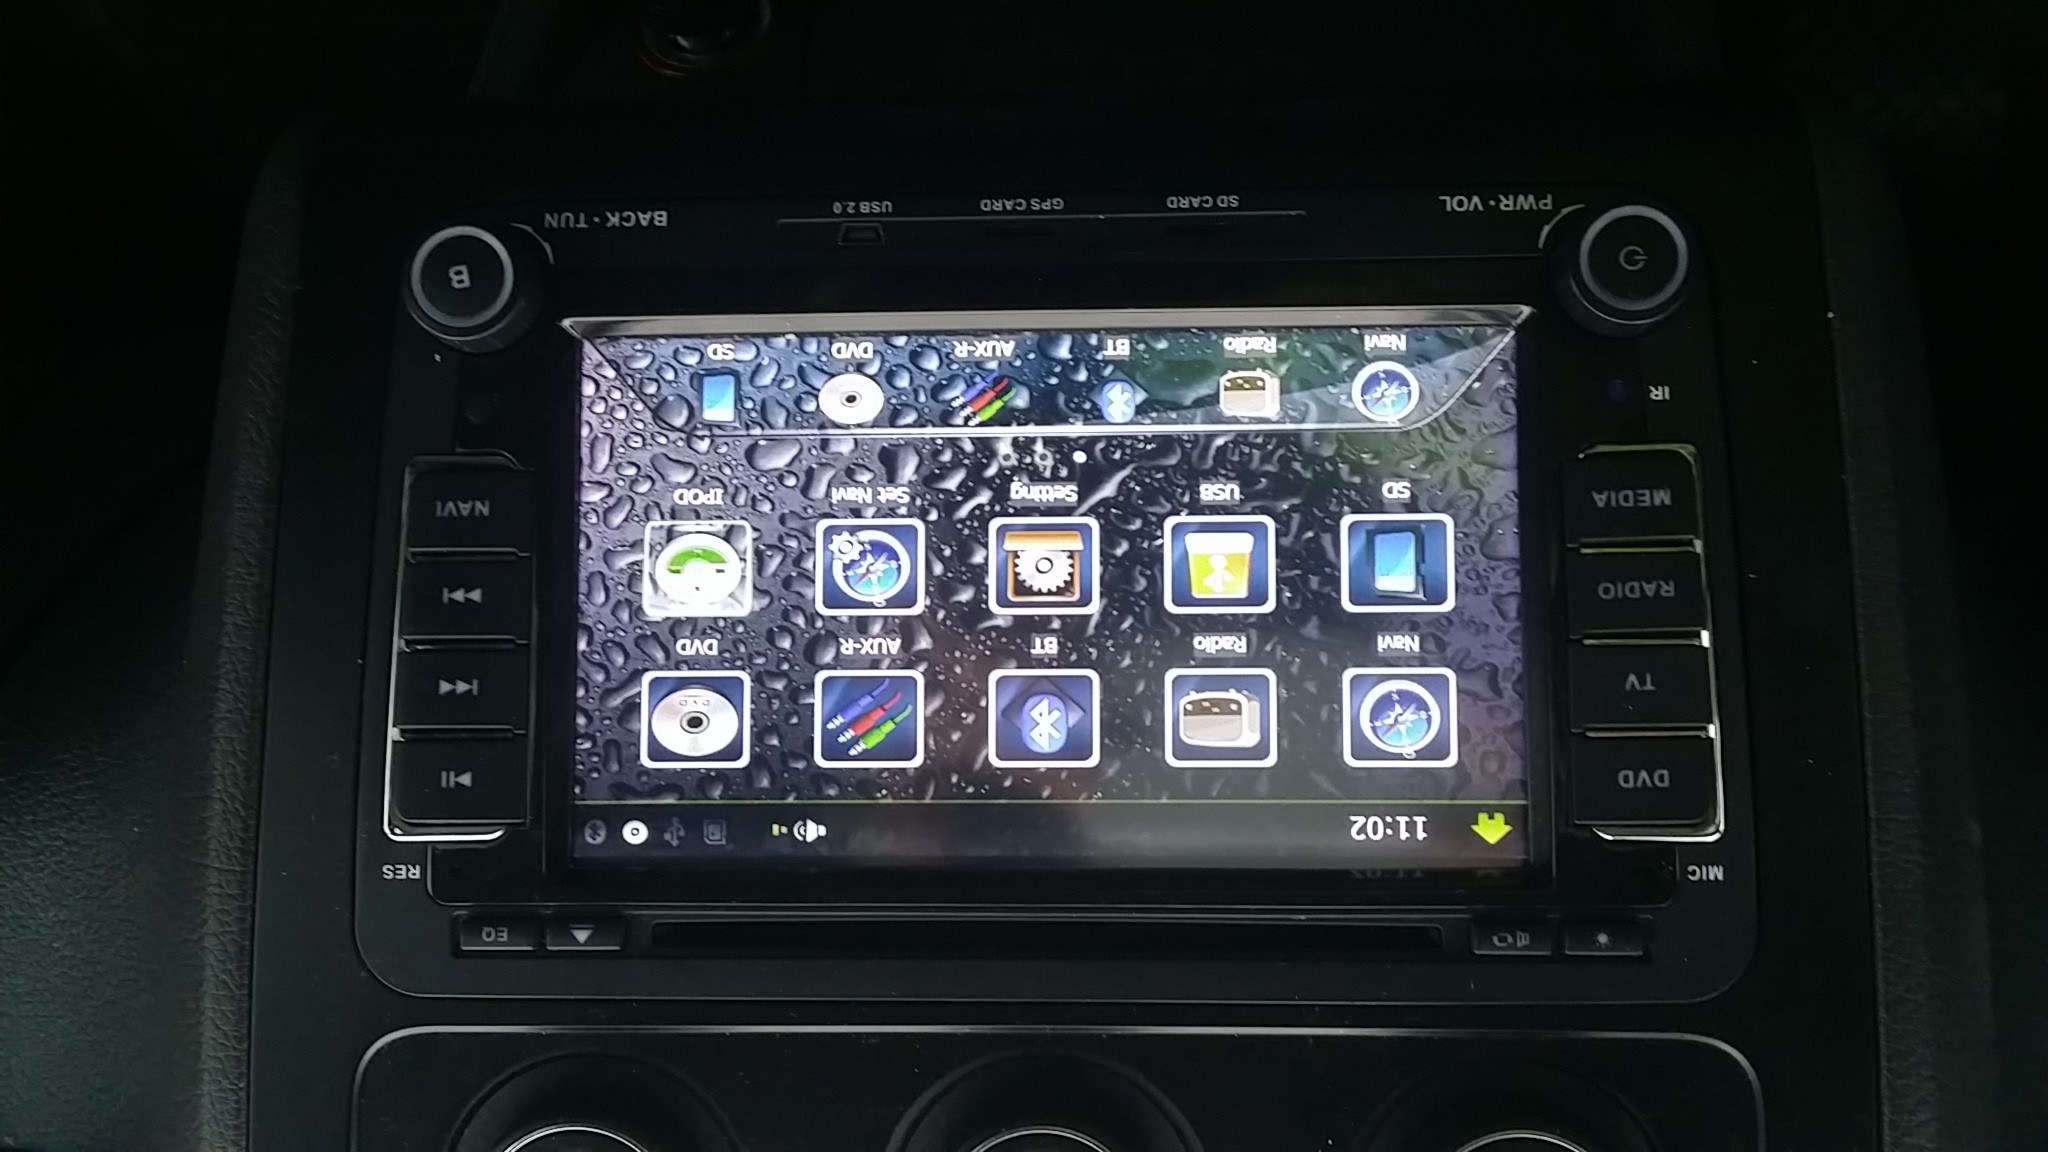 Can Not Find User Manual For Gps Dvd Headunit . Vw Touran ...